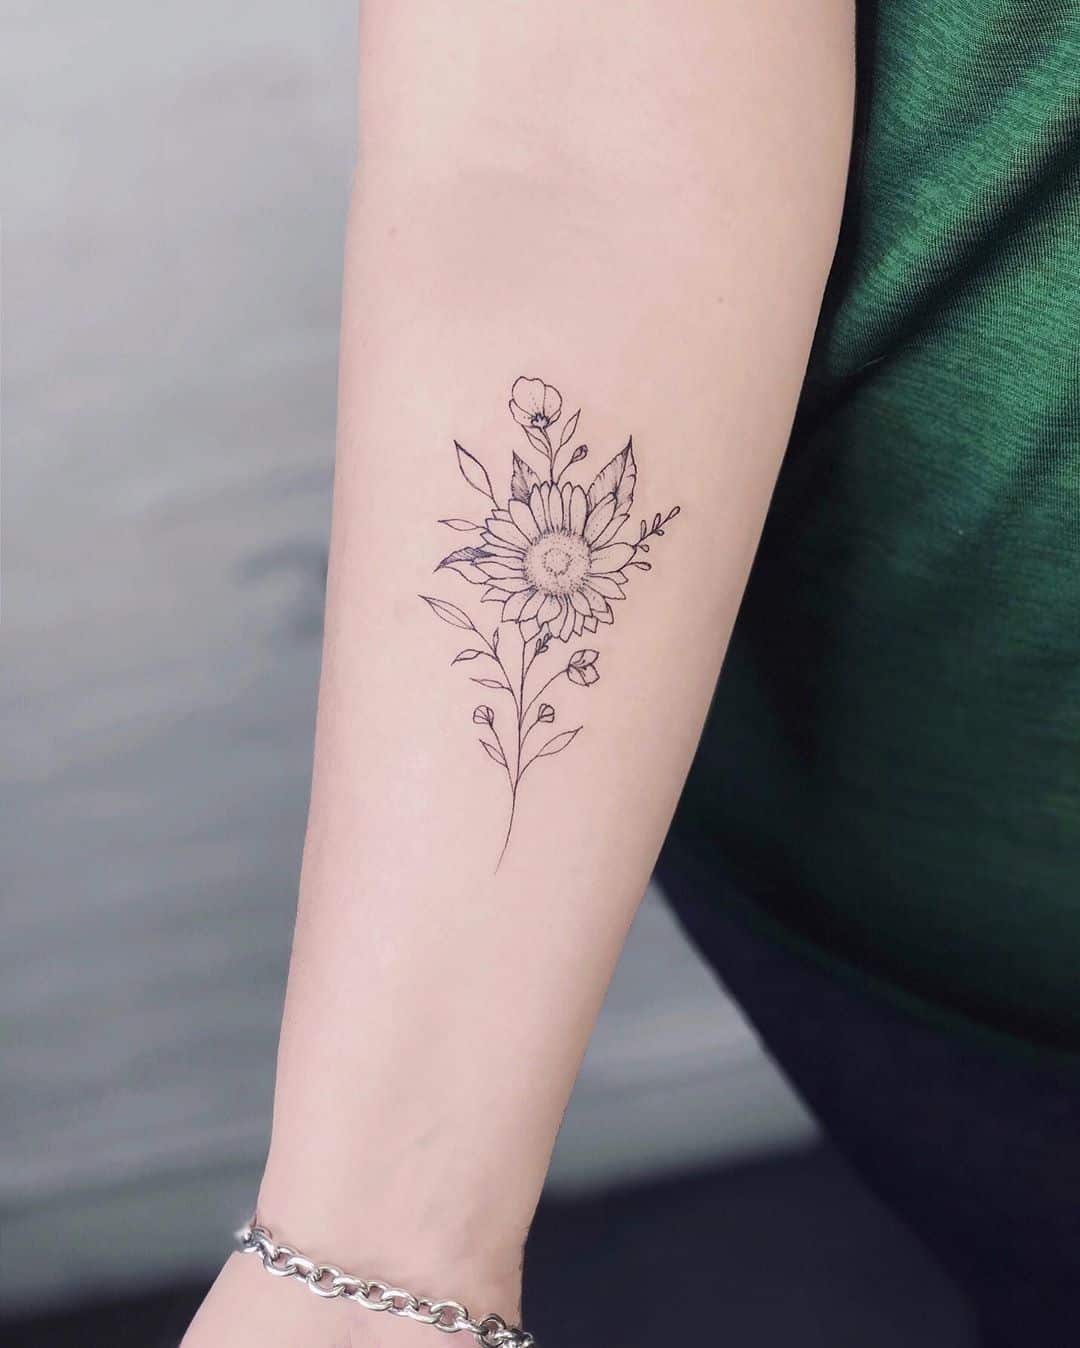 Sunflower Tattoo within a Bouquet